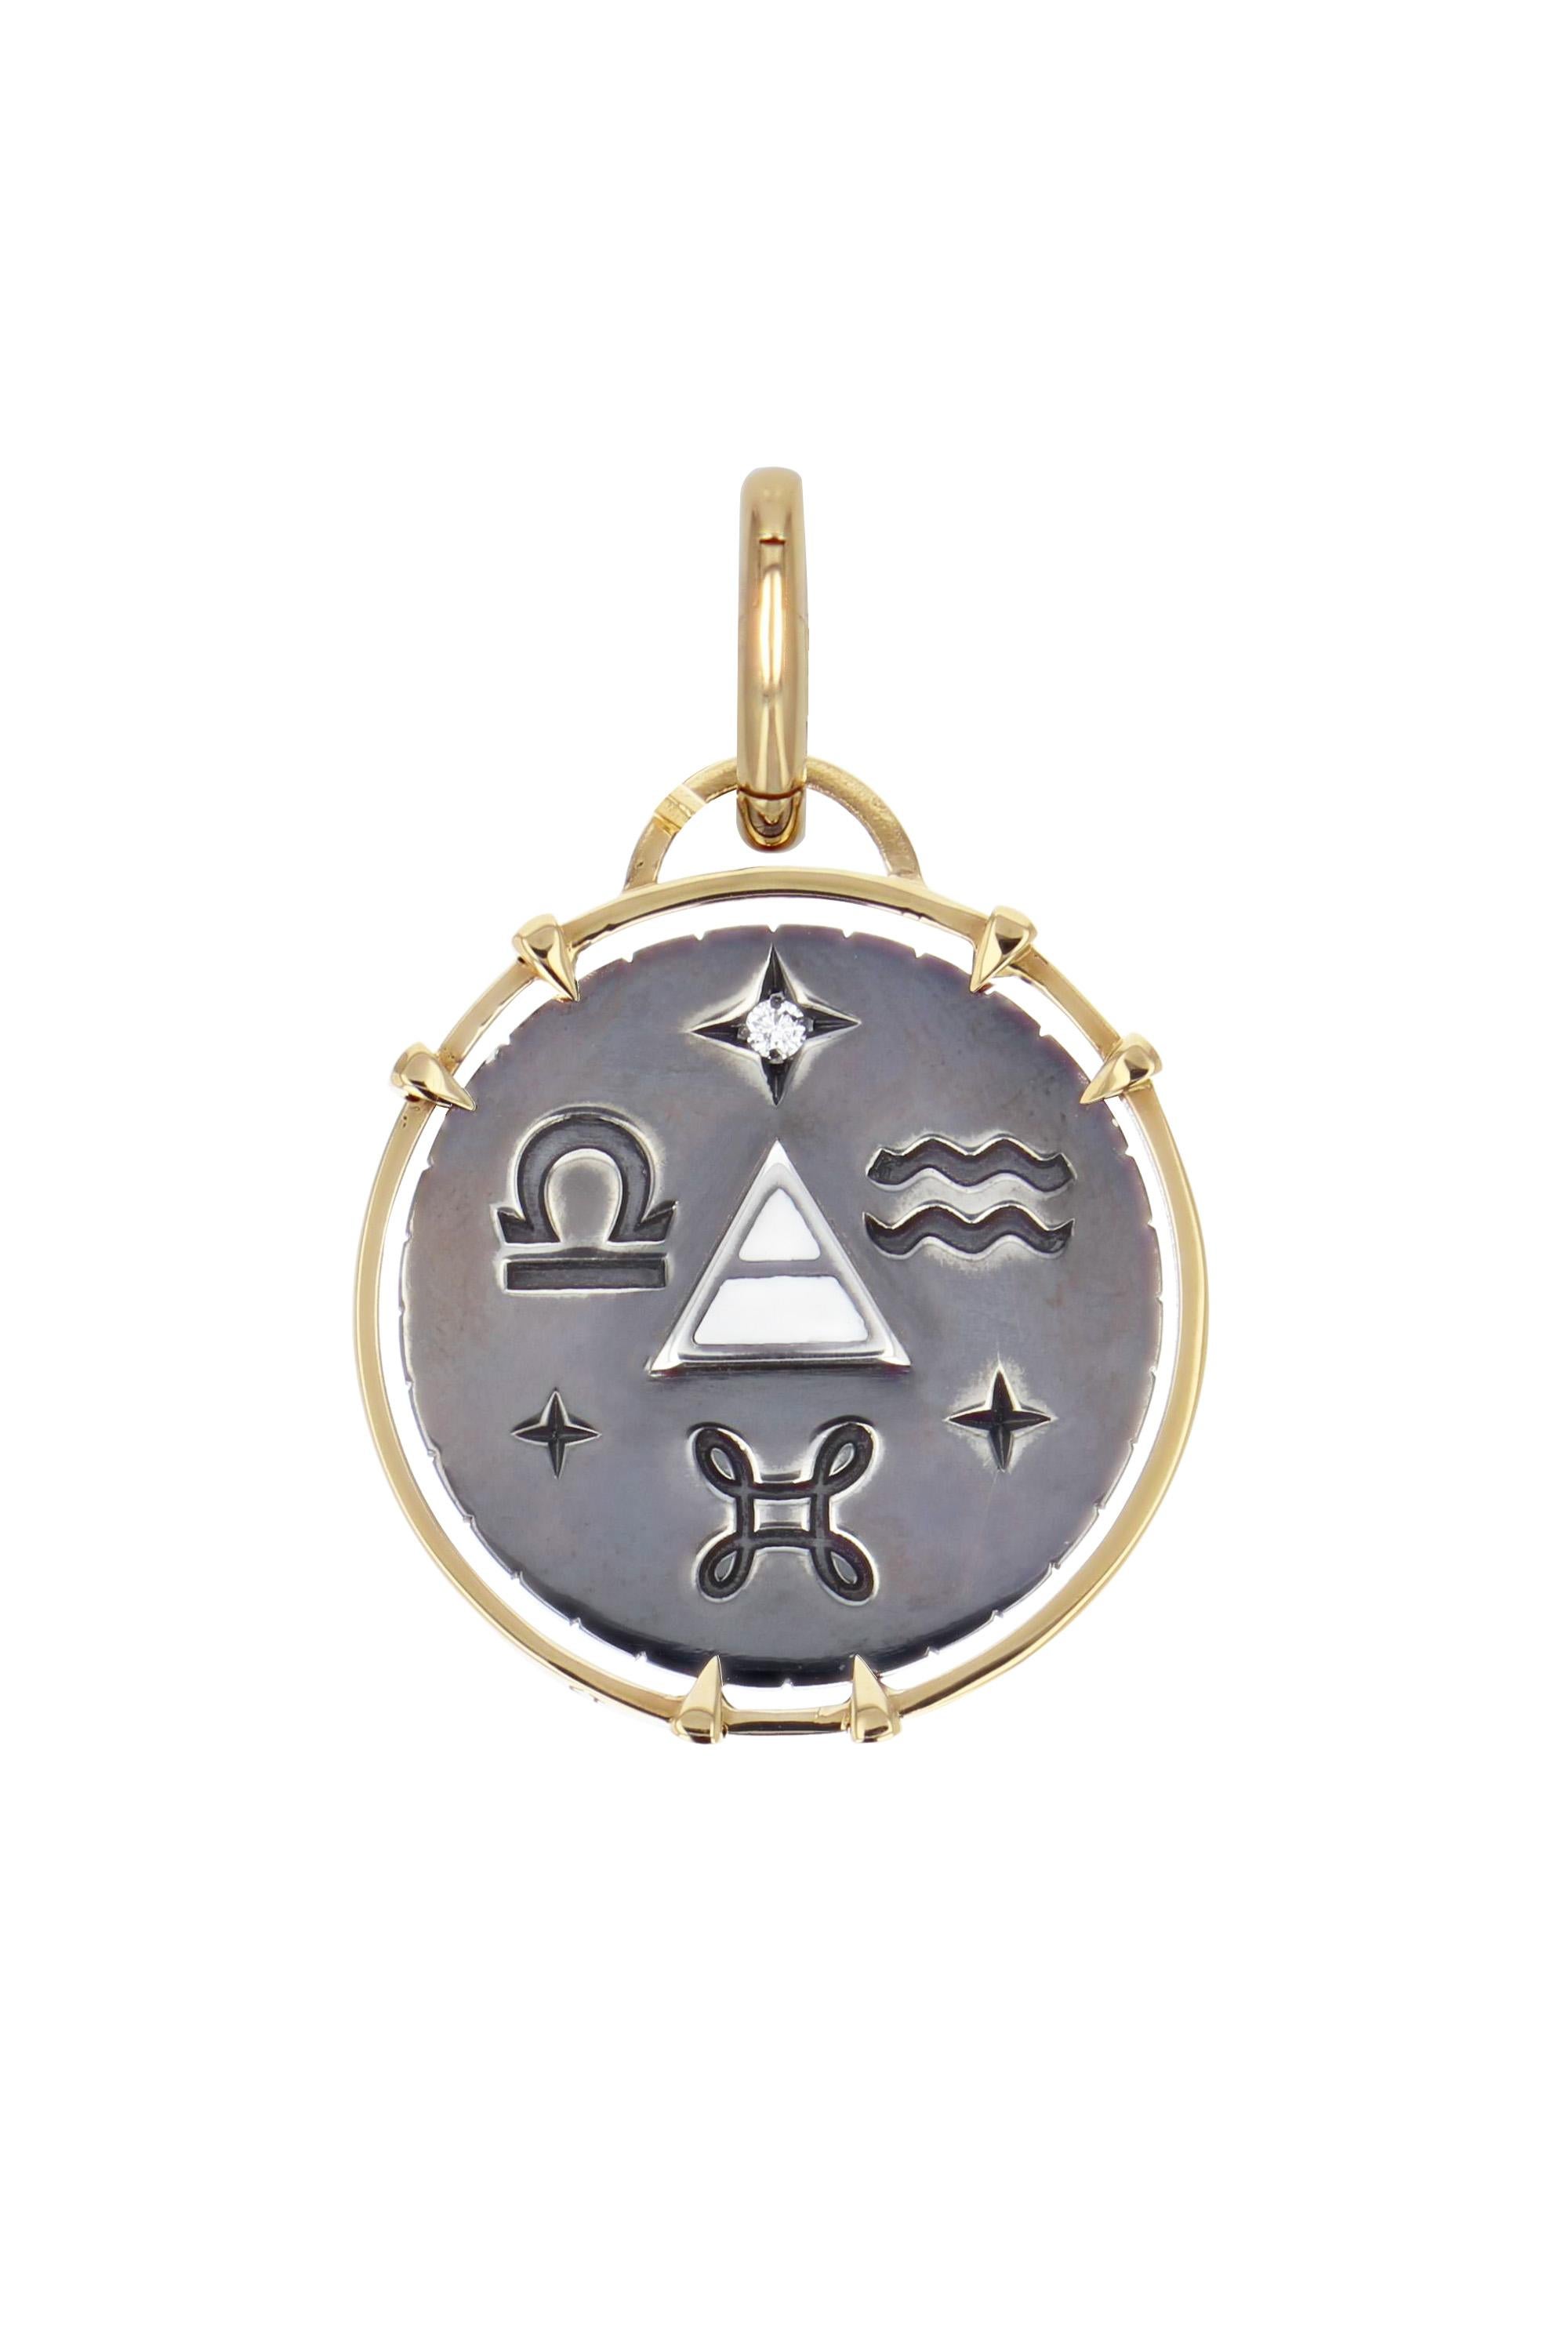 Yellow gold and distressed silver charm. Studded with a diamond, the charm embraces all the symbols linked to the Air sign with a gold spade on its front and the alchemy triangle surrounded by its zodiac signs  (Libra, Gemini, Aquarius) on its